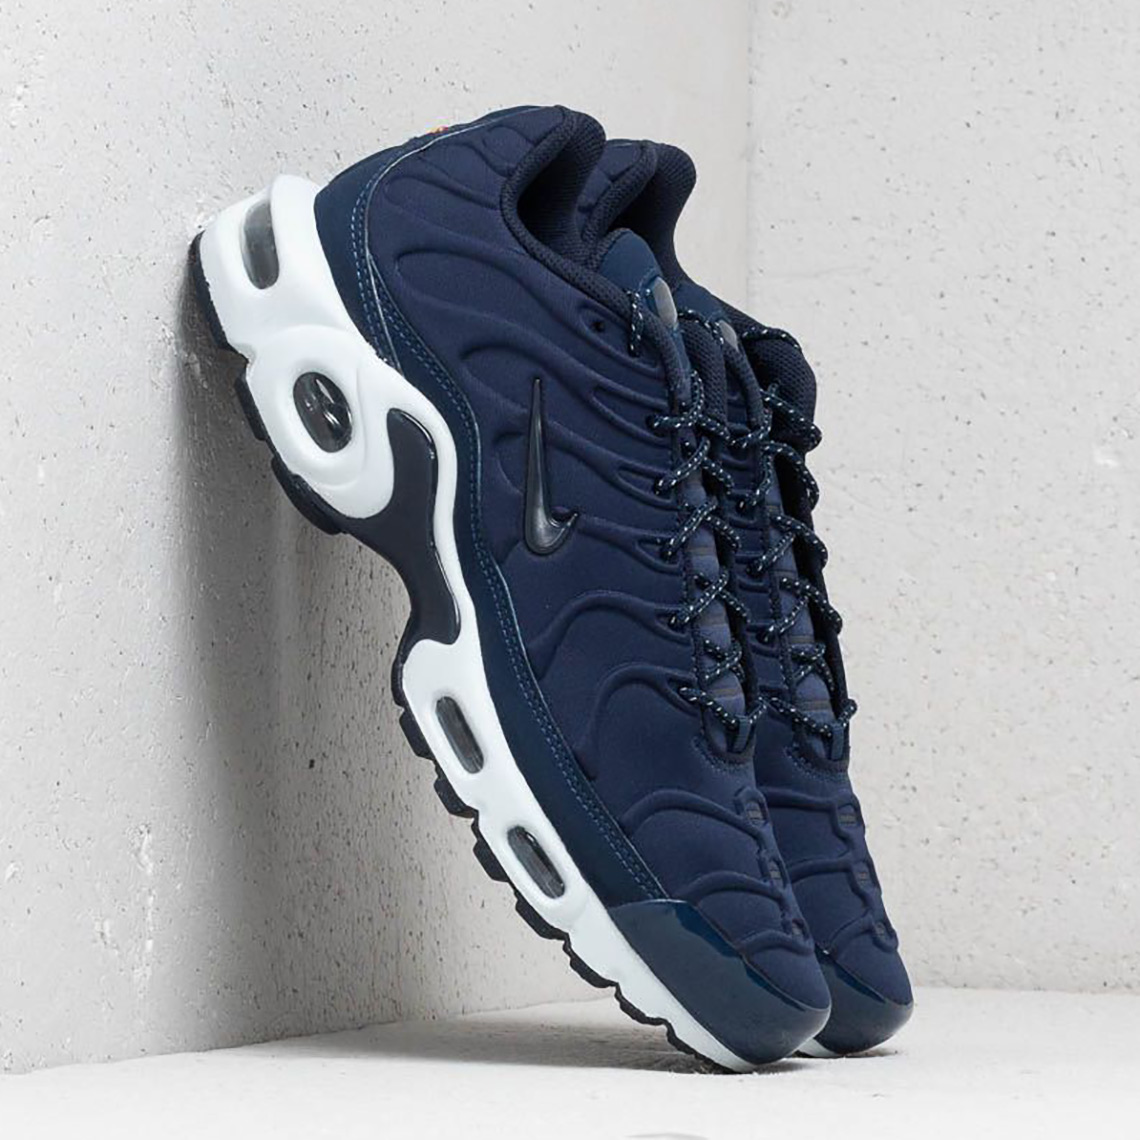 Nike Air Max Plus Midnight Navy Release Info | SneakerNews.com